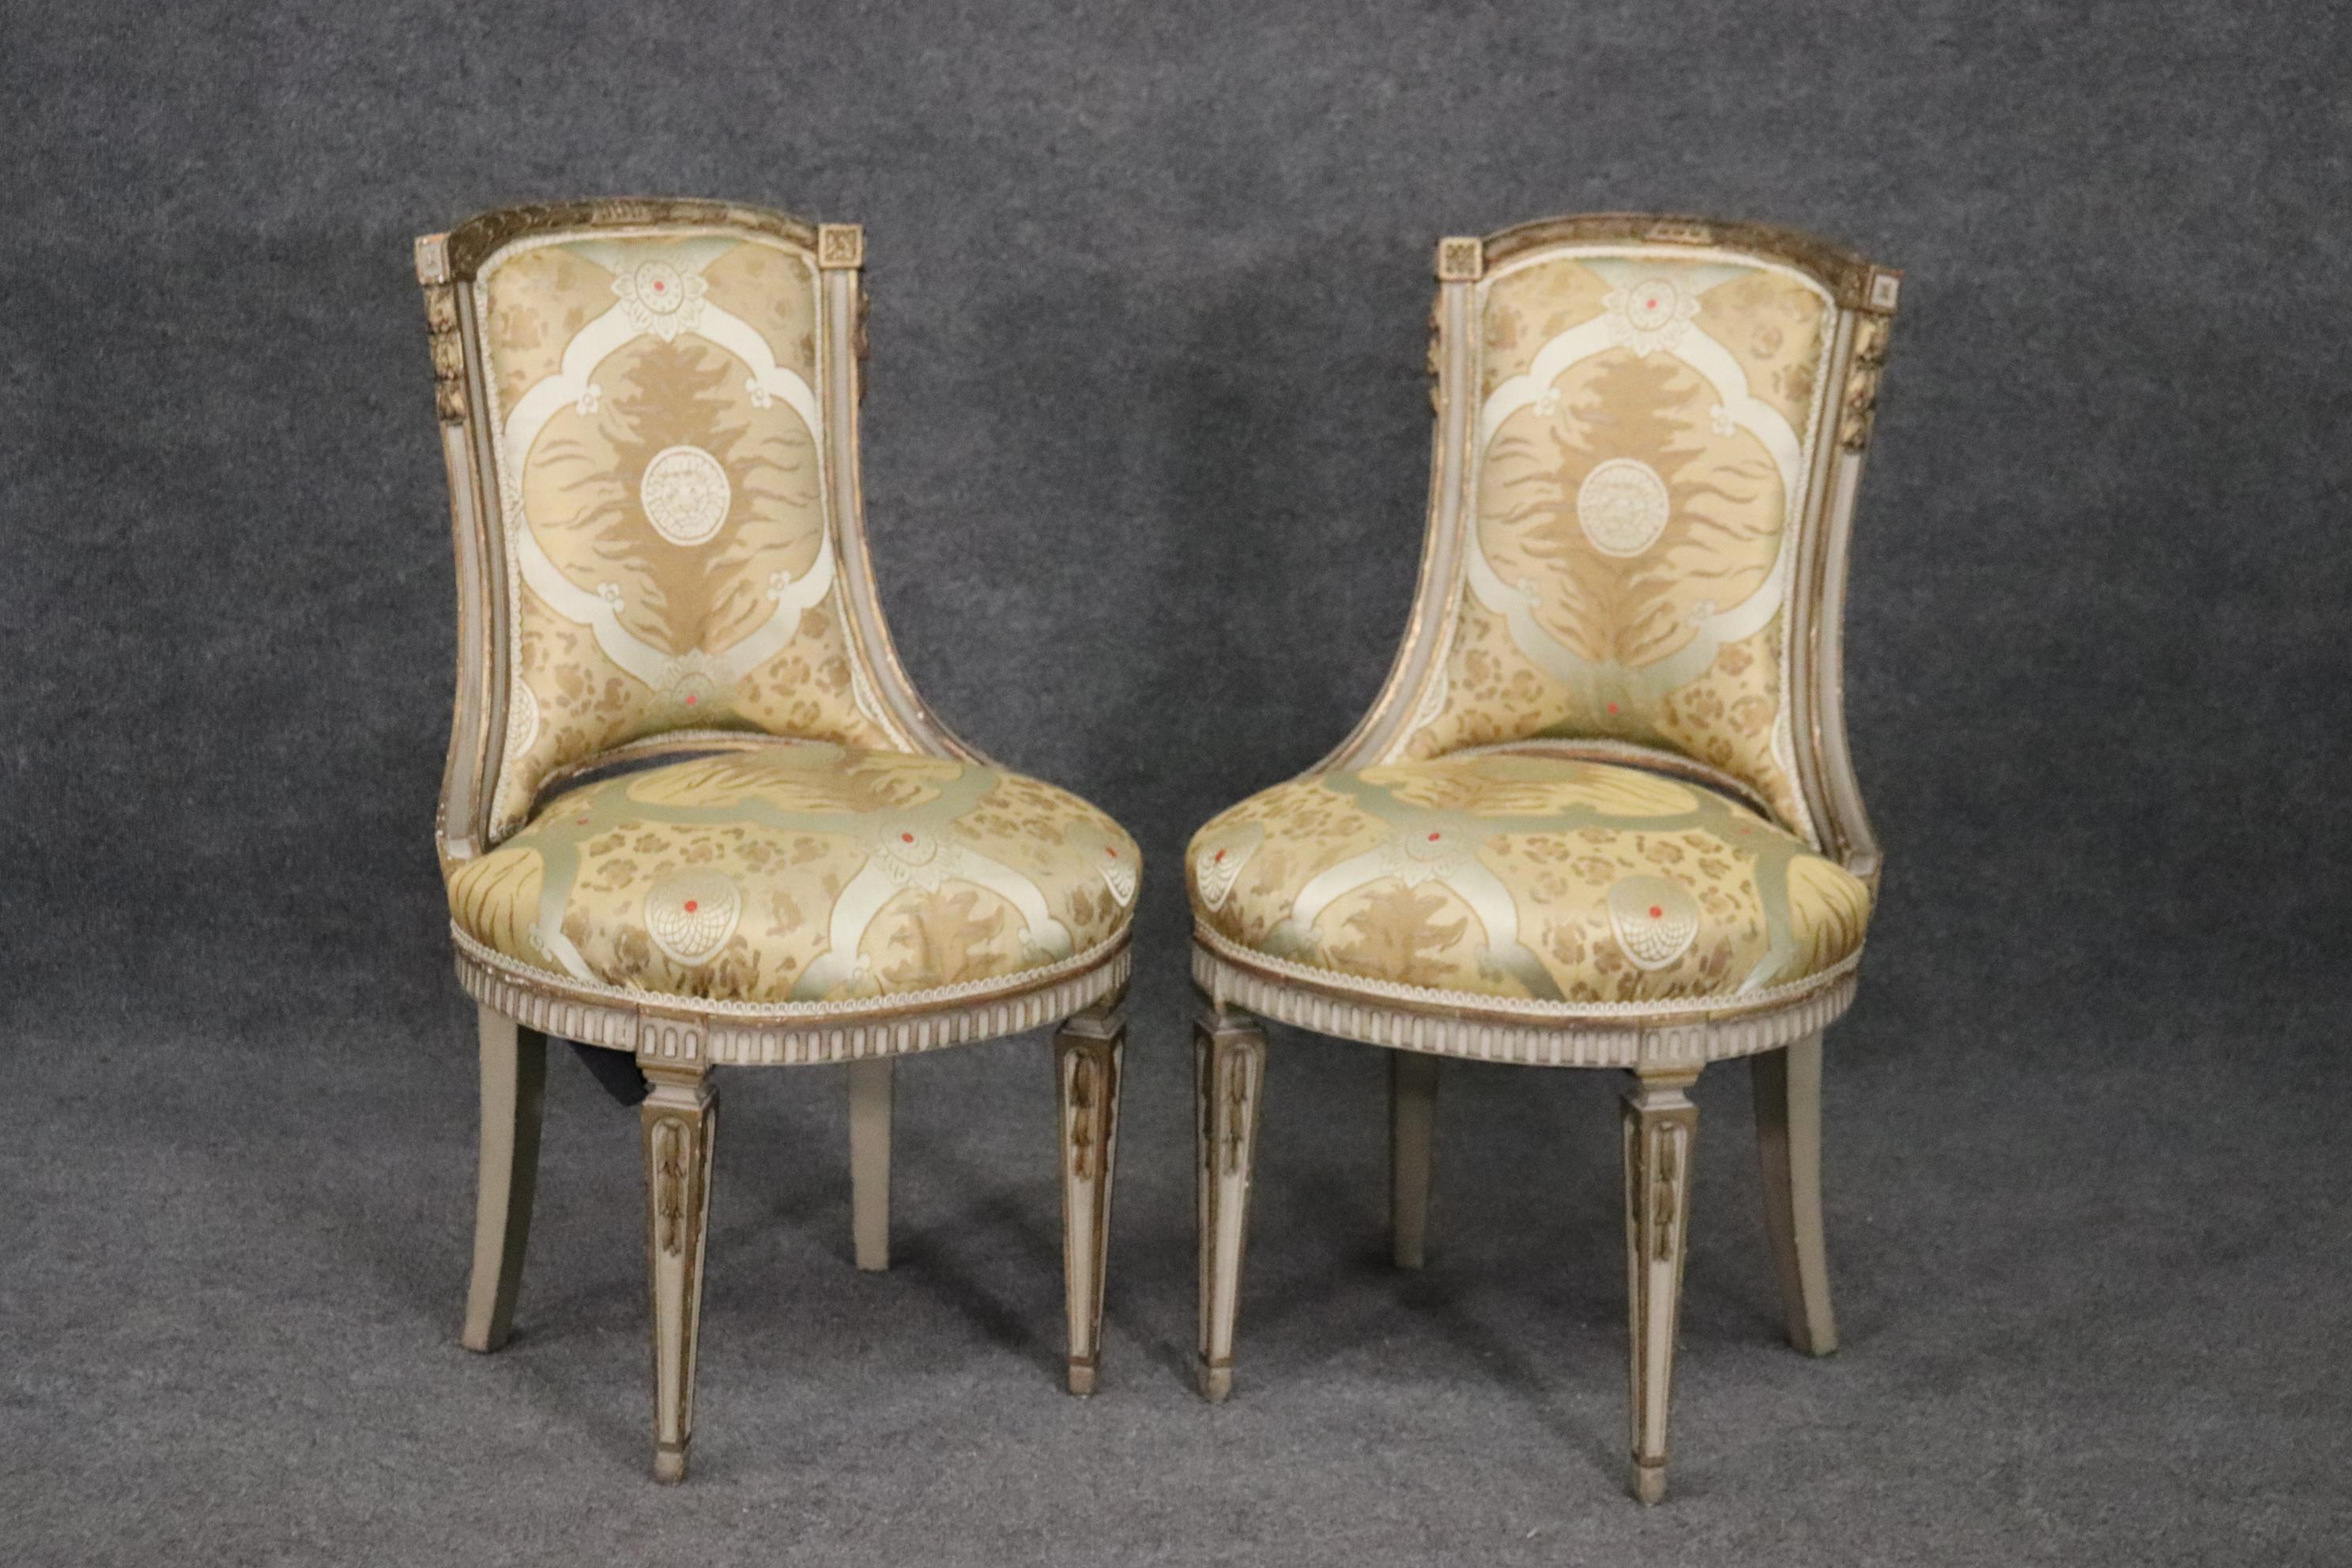 Beautiful pair of chairs. Nice painted frames. The upholstery is original so it may need to be redone. Measures 36 tall x 20 wide x 21 deep x seat height of 19.